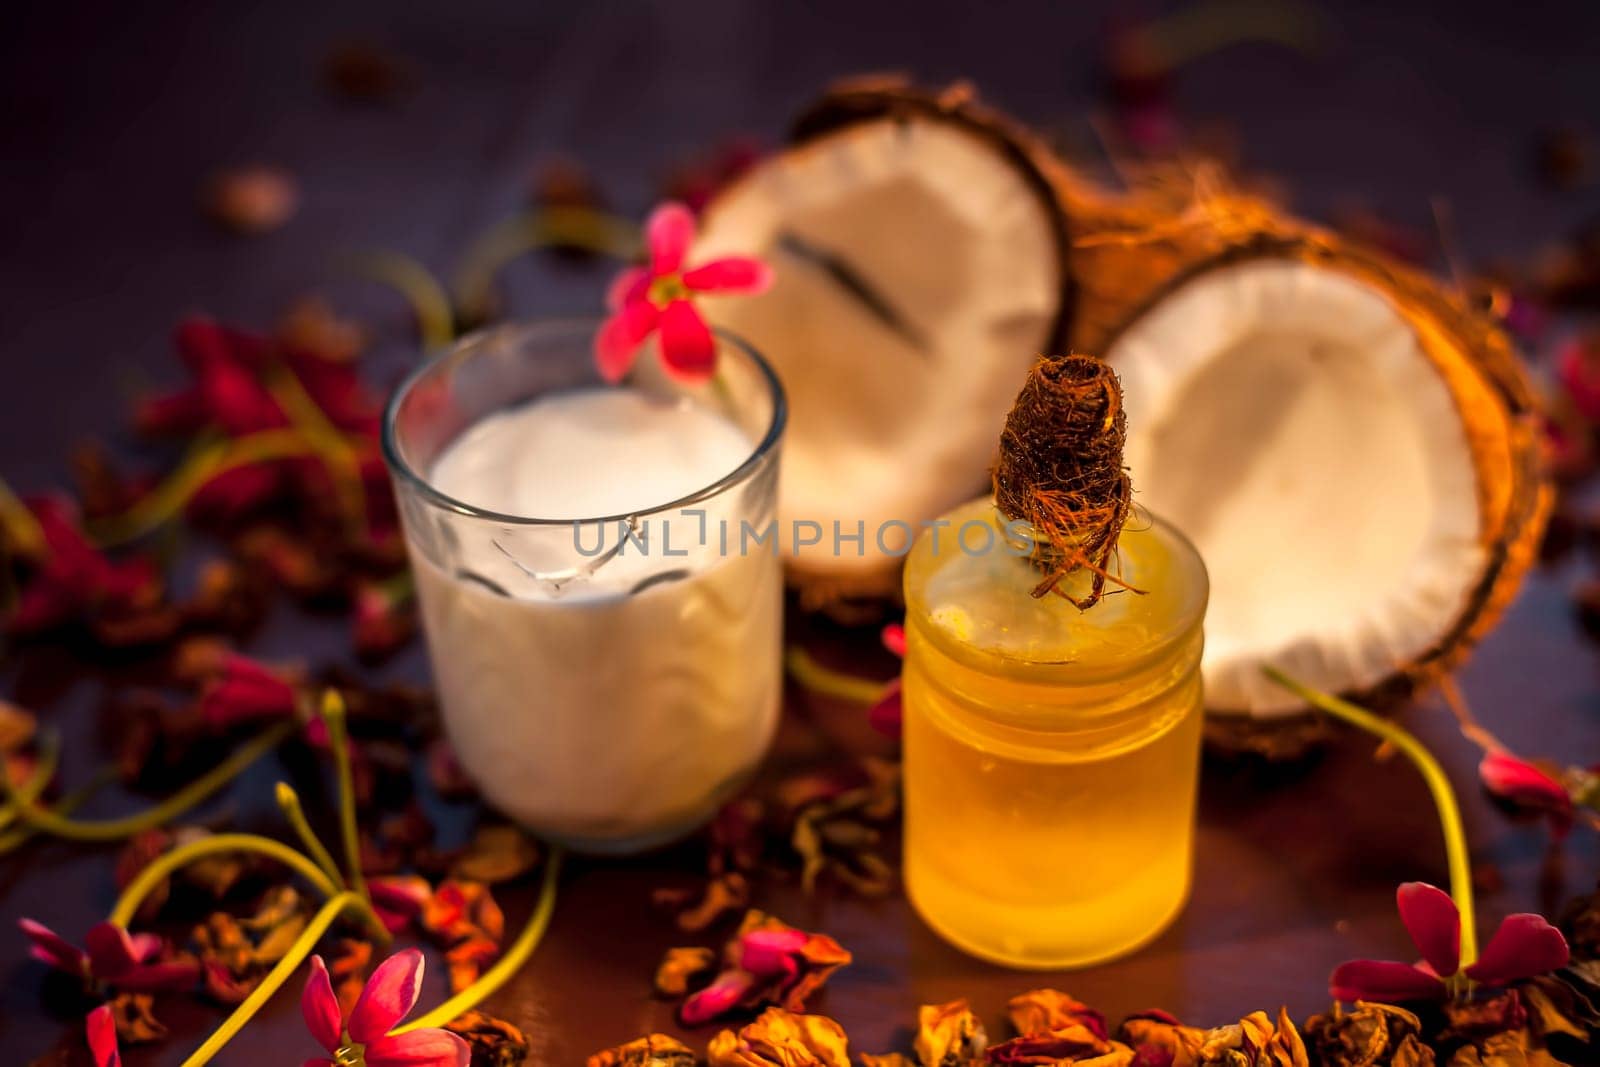 Coconut face mask on the brown colored surface consisting of some coconut milk and olive oil when applied penetrates the skin and exfoliates deeply. Face mask for protection against skin damage.